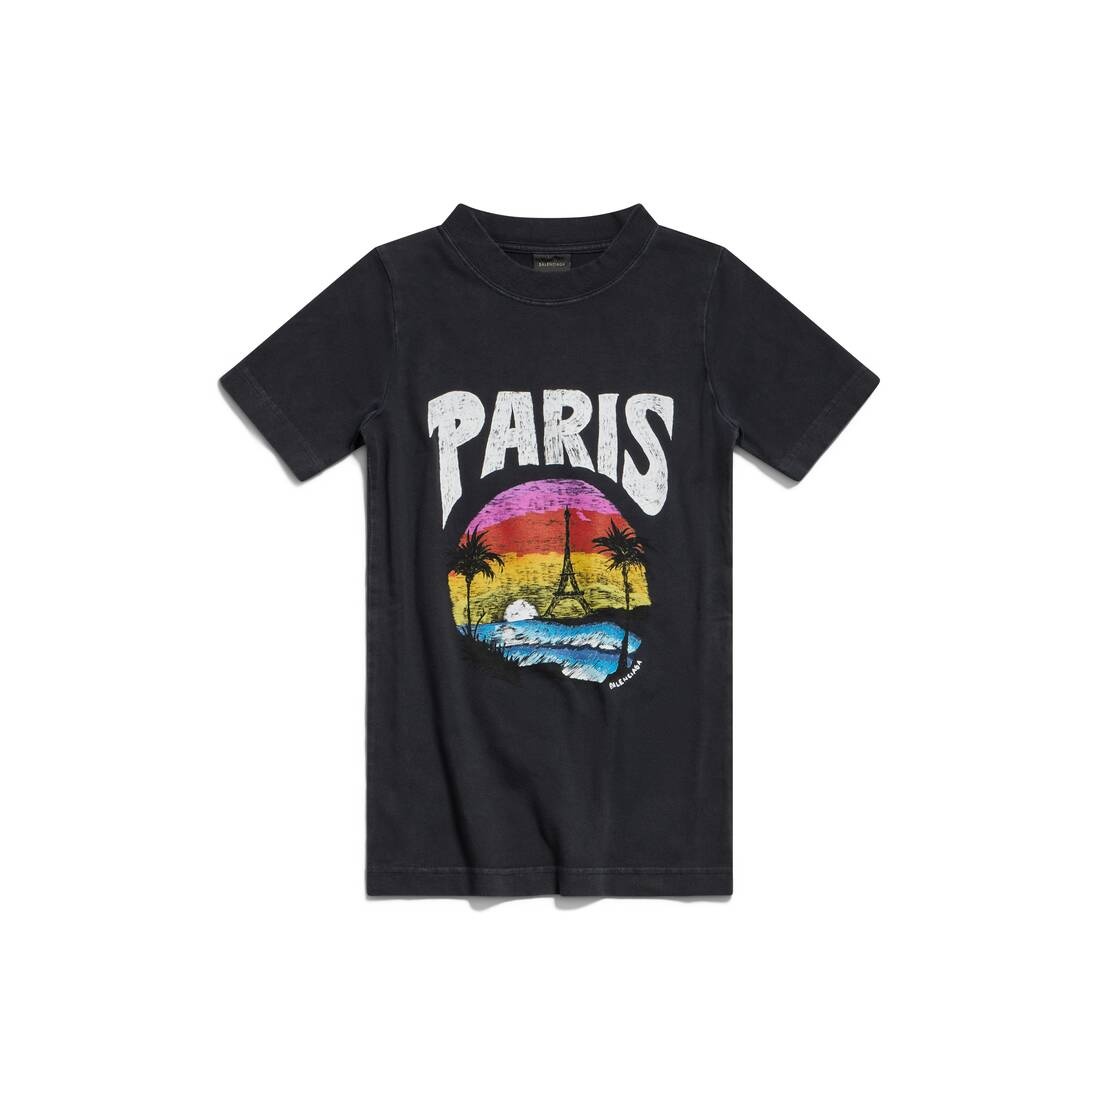 Women's Paris Tropical T-shirt Fitted in Black/white - 1